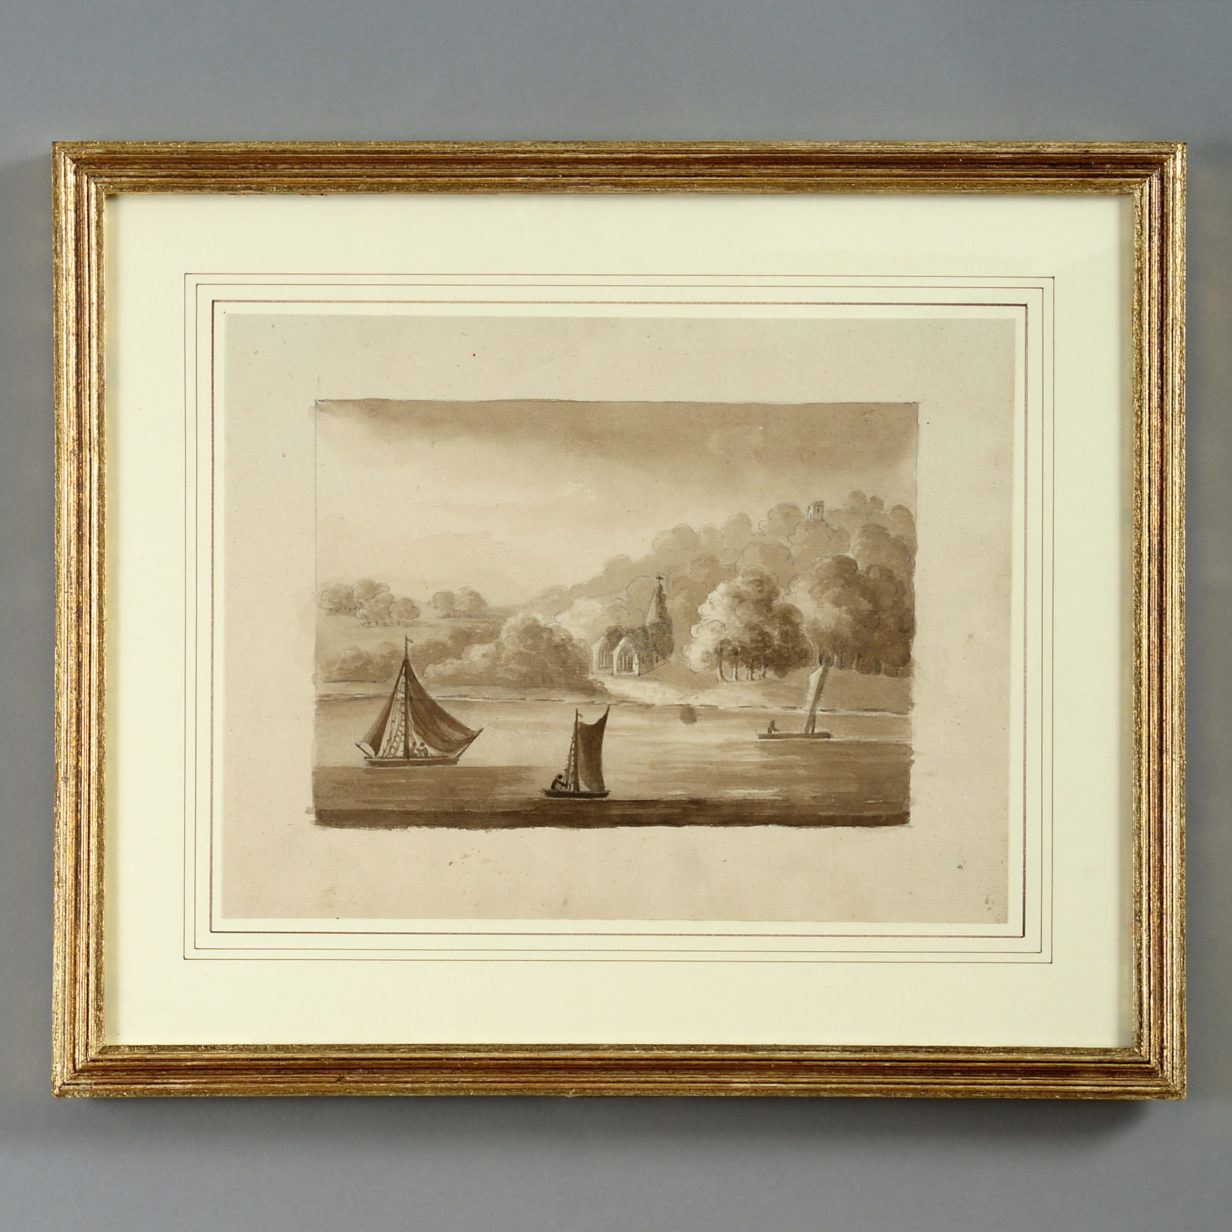 An early 19th century sepia watercolour drawing